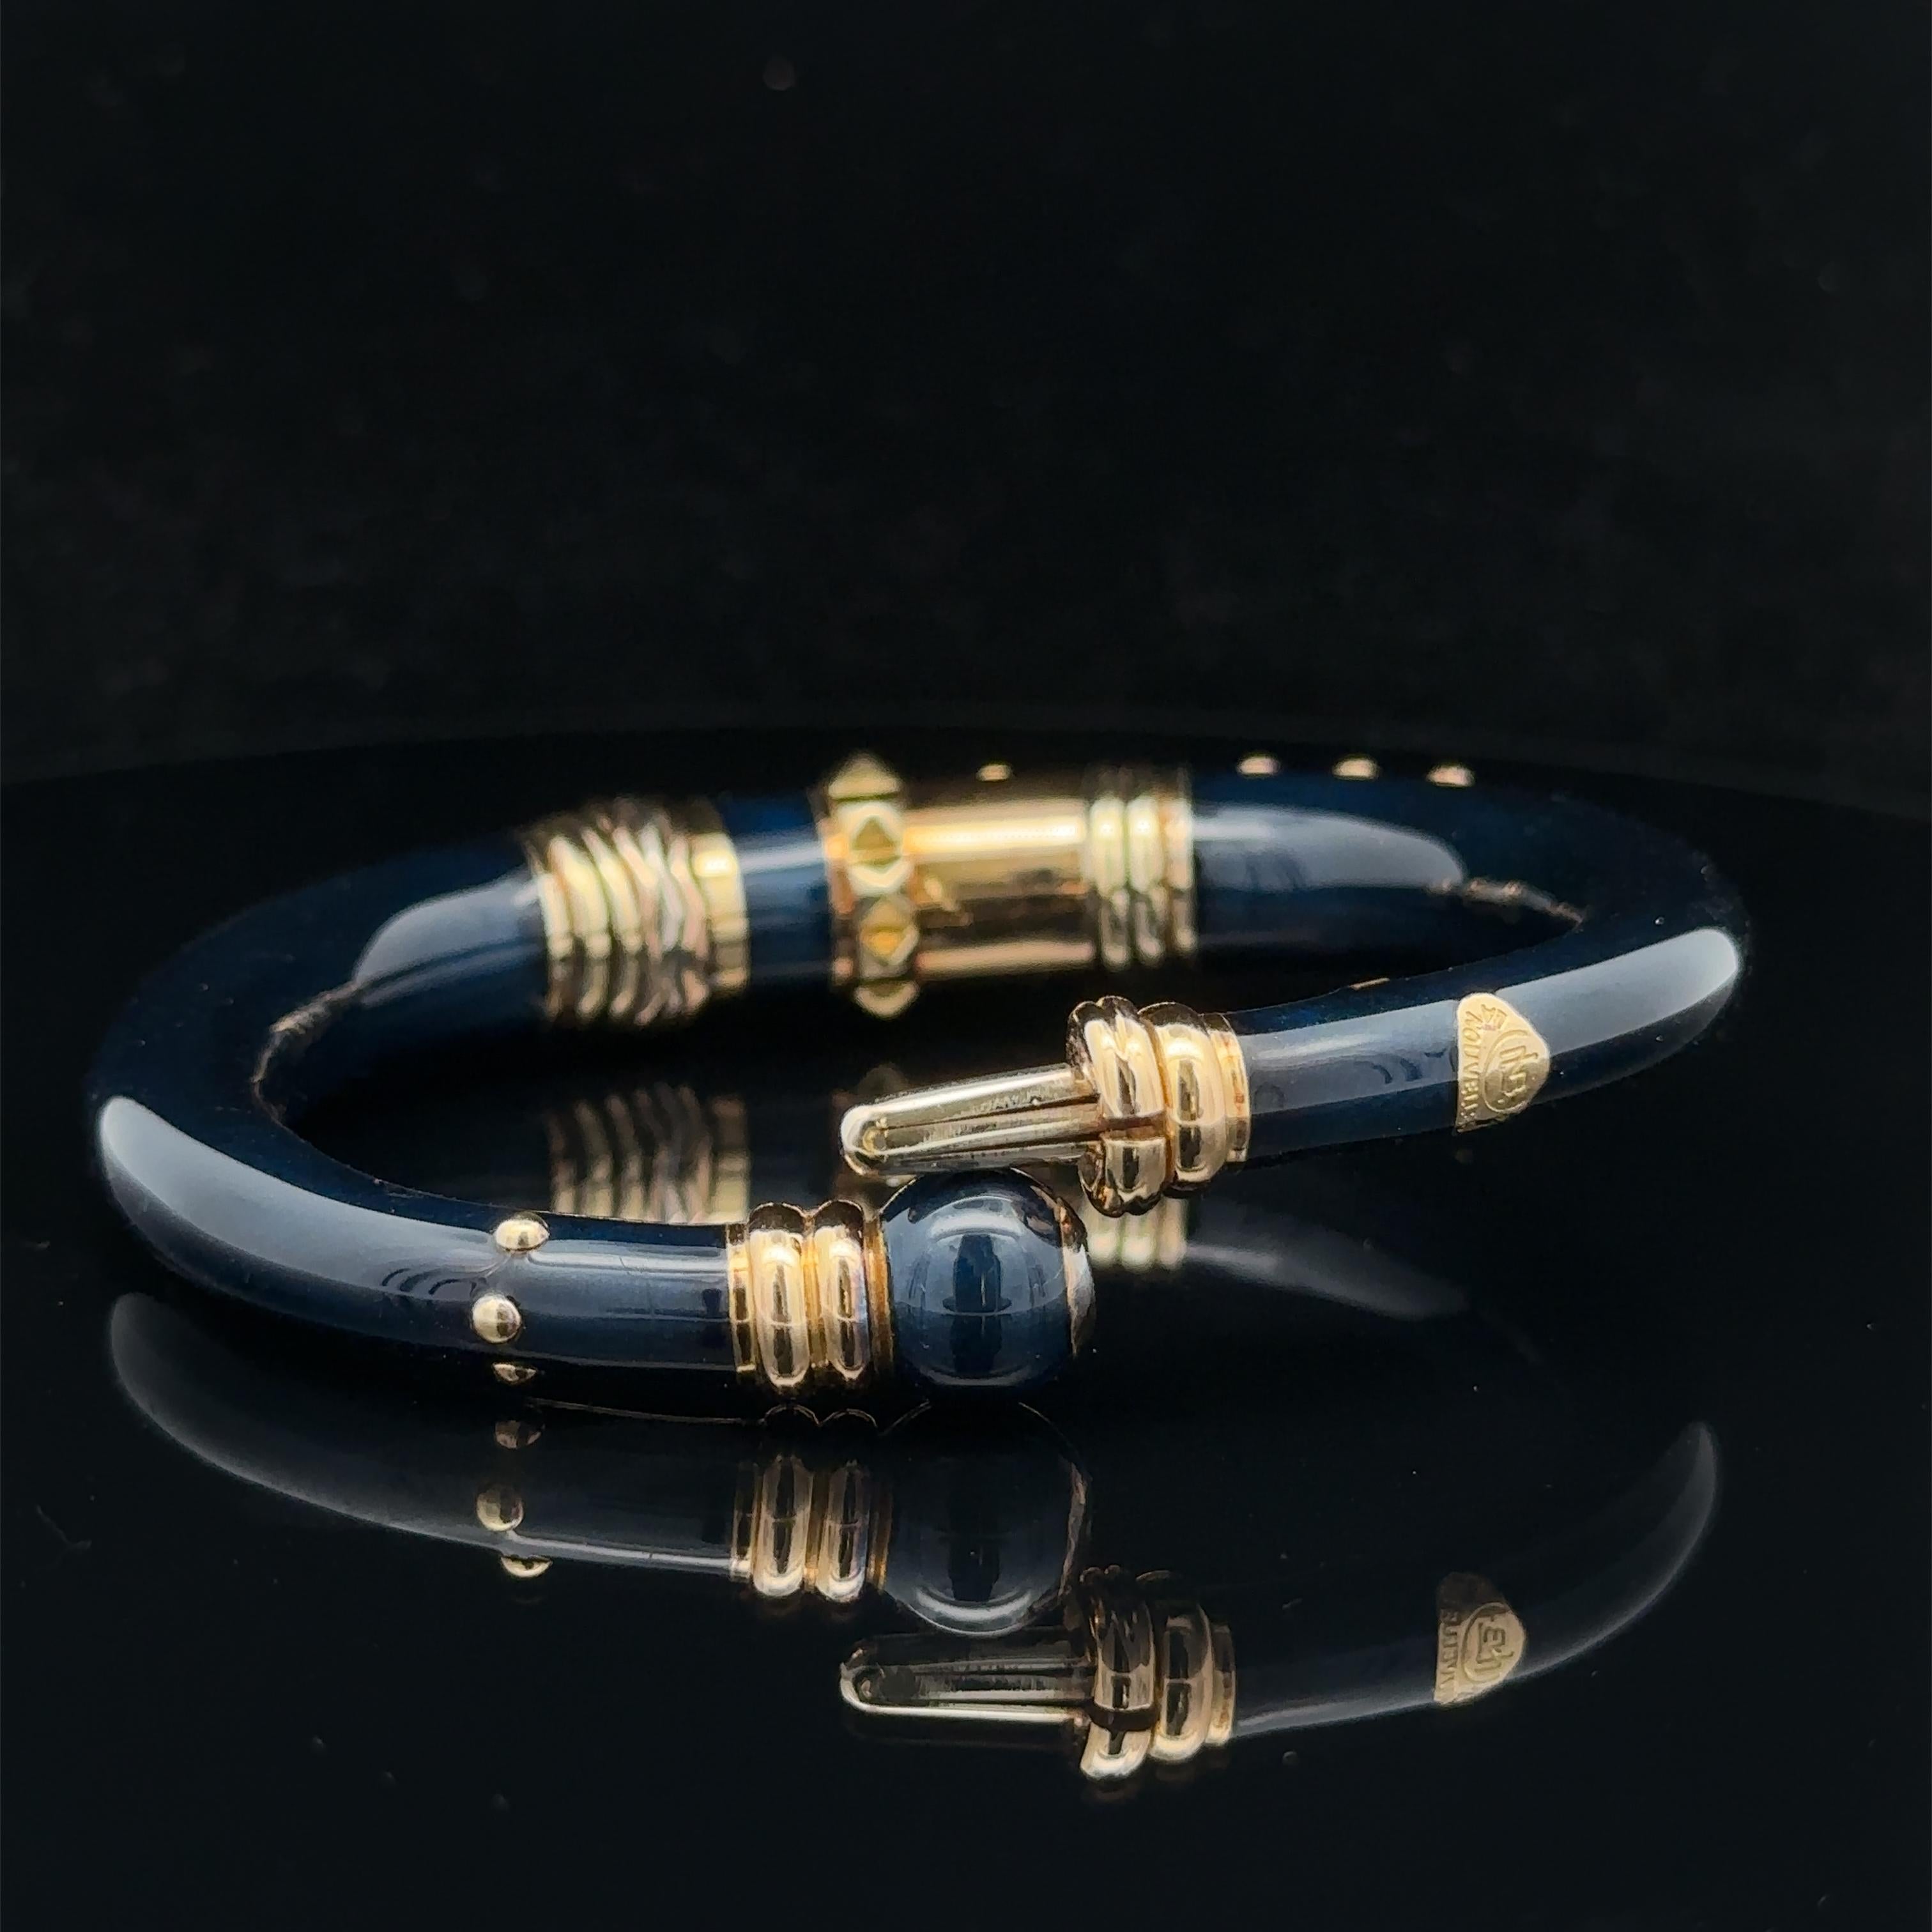 Material:18k Yellow Gold - Sterling Silver Accents - Deep Blue Enamel
Weight: 45.33 Grams
Type: Twist Hinge Bangle
Length: Will comfortably fit up to 7” wrist (fitted on wrist)
Closure: Push Pin?
Overall Width: 74.09mm (2.91”) (approx.)
Thickness: